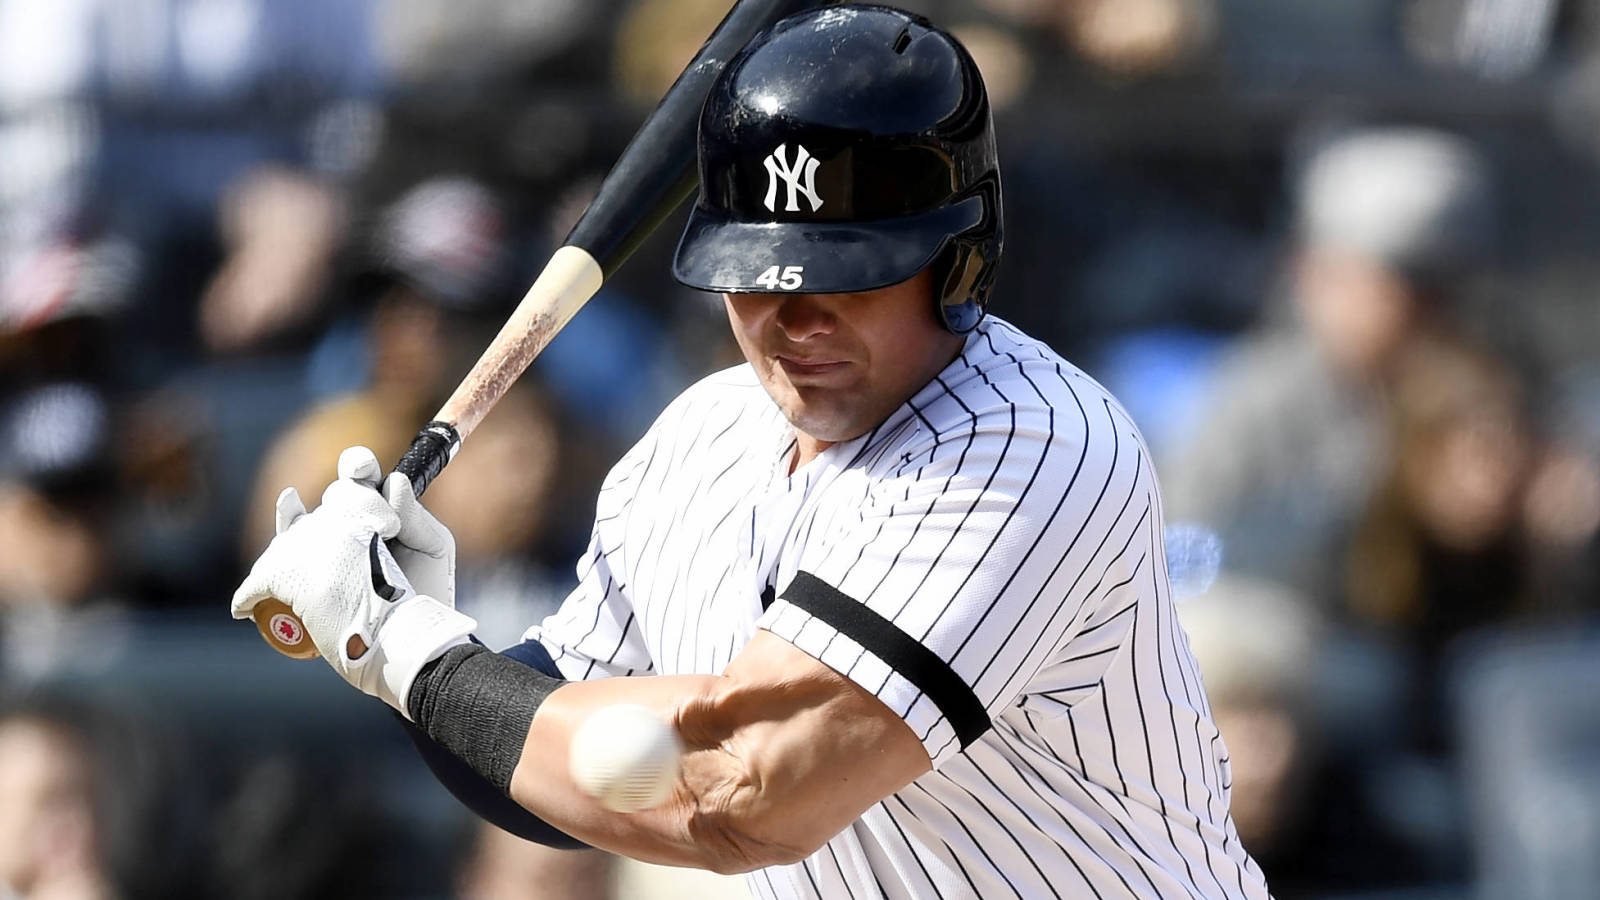 Great photo of Luke Voit's hit-by-pitch wows Internet